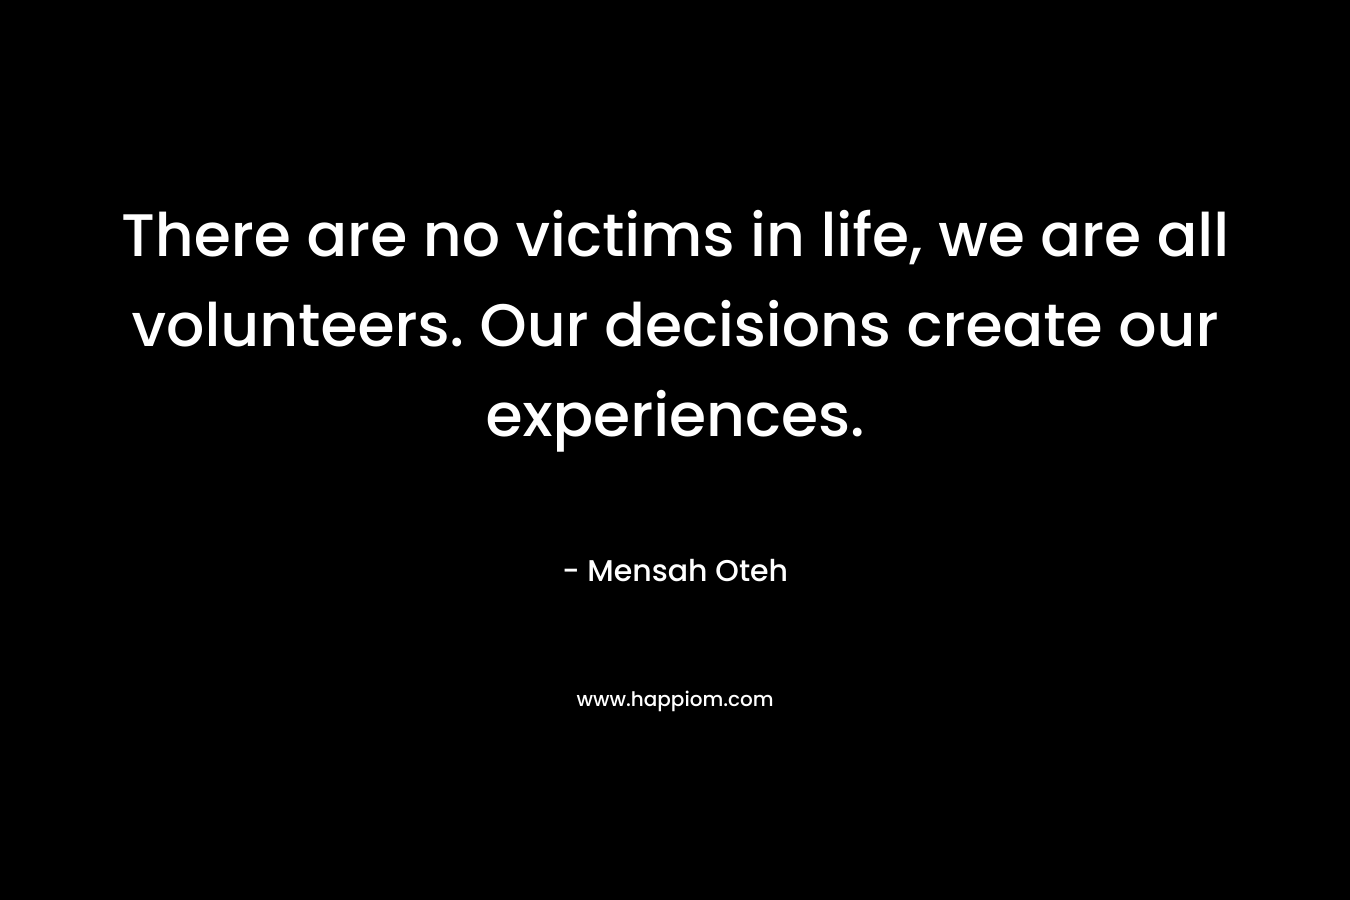 There are no victims in life, we are all volunteers. Our decisions create our experiences.